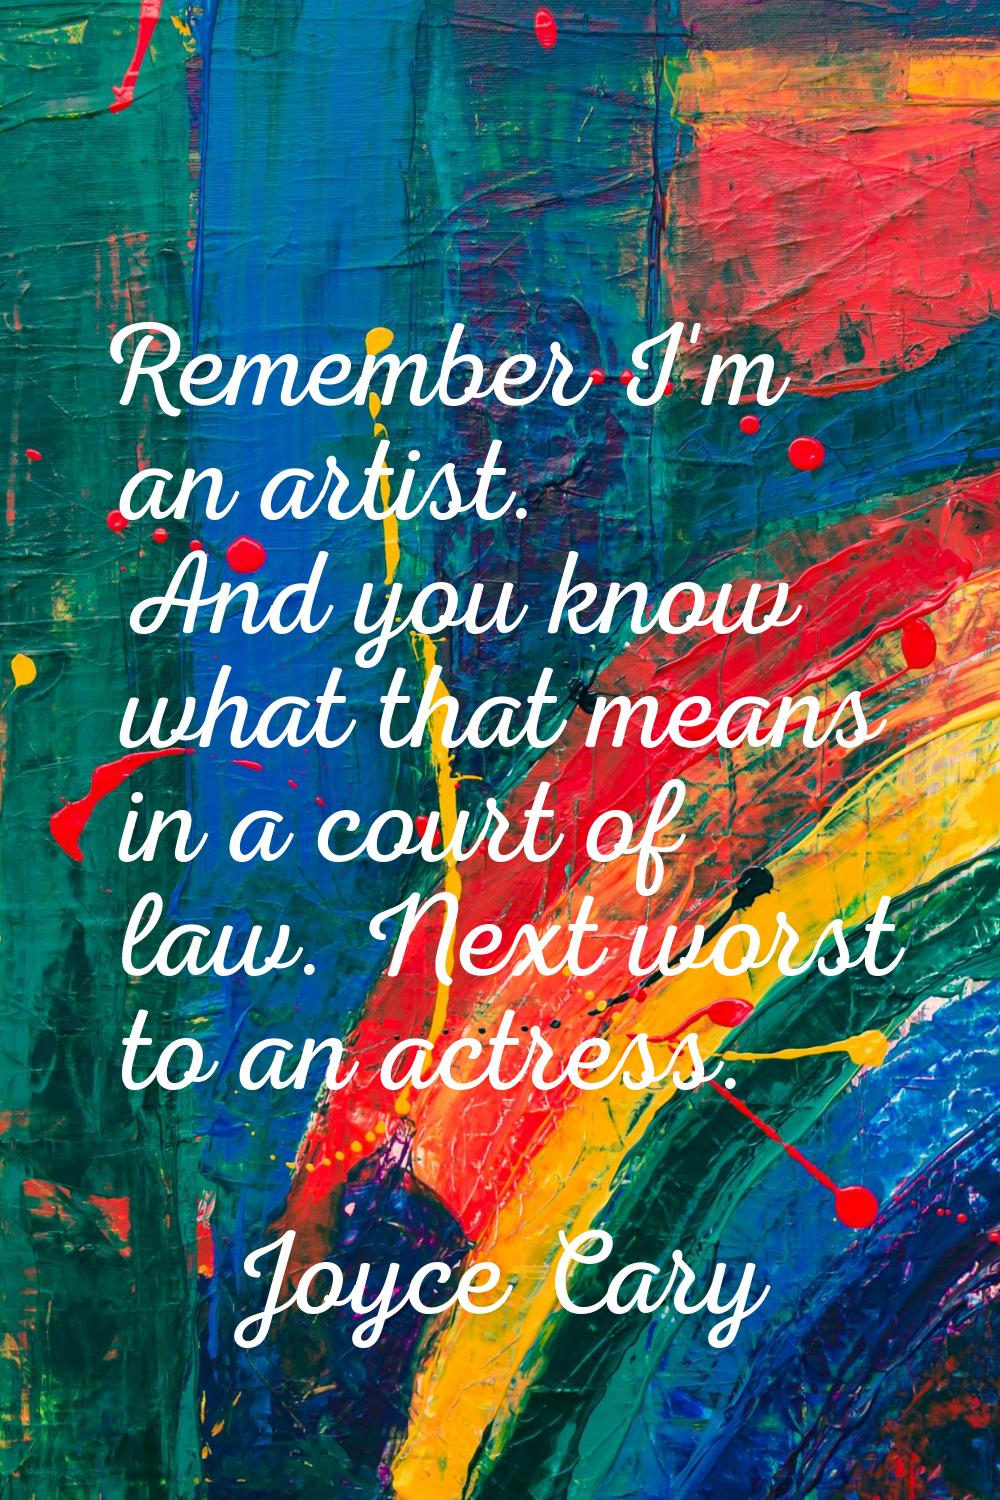 Remember I'm an artist. And you know what that means in a court of law. Next worst to an actress.